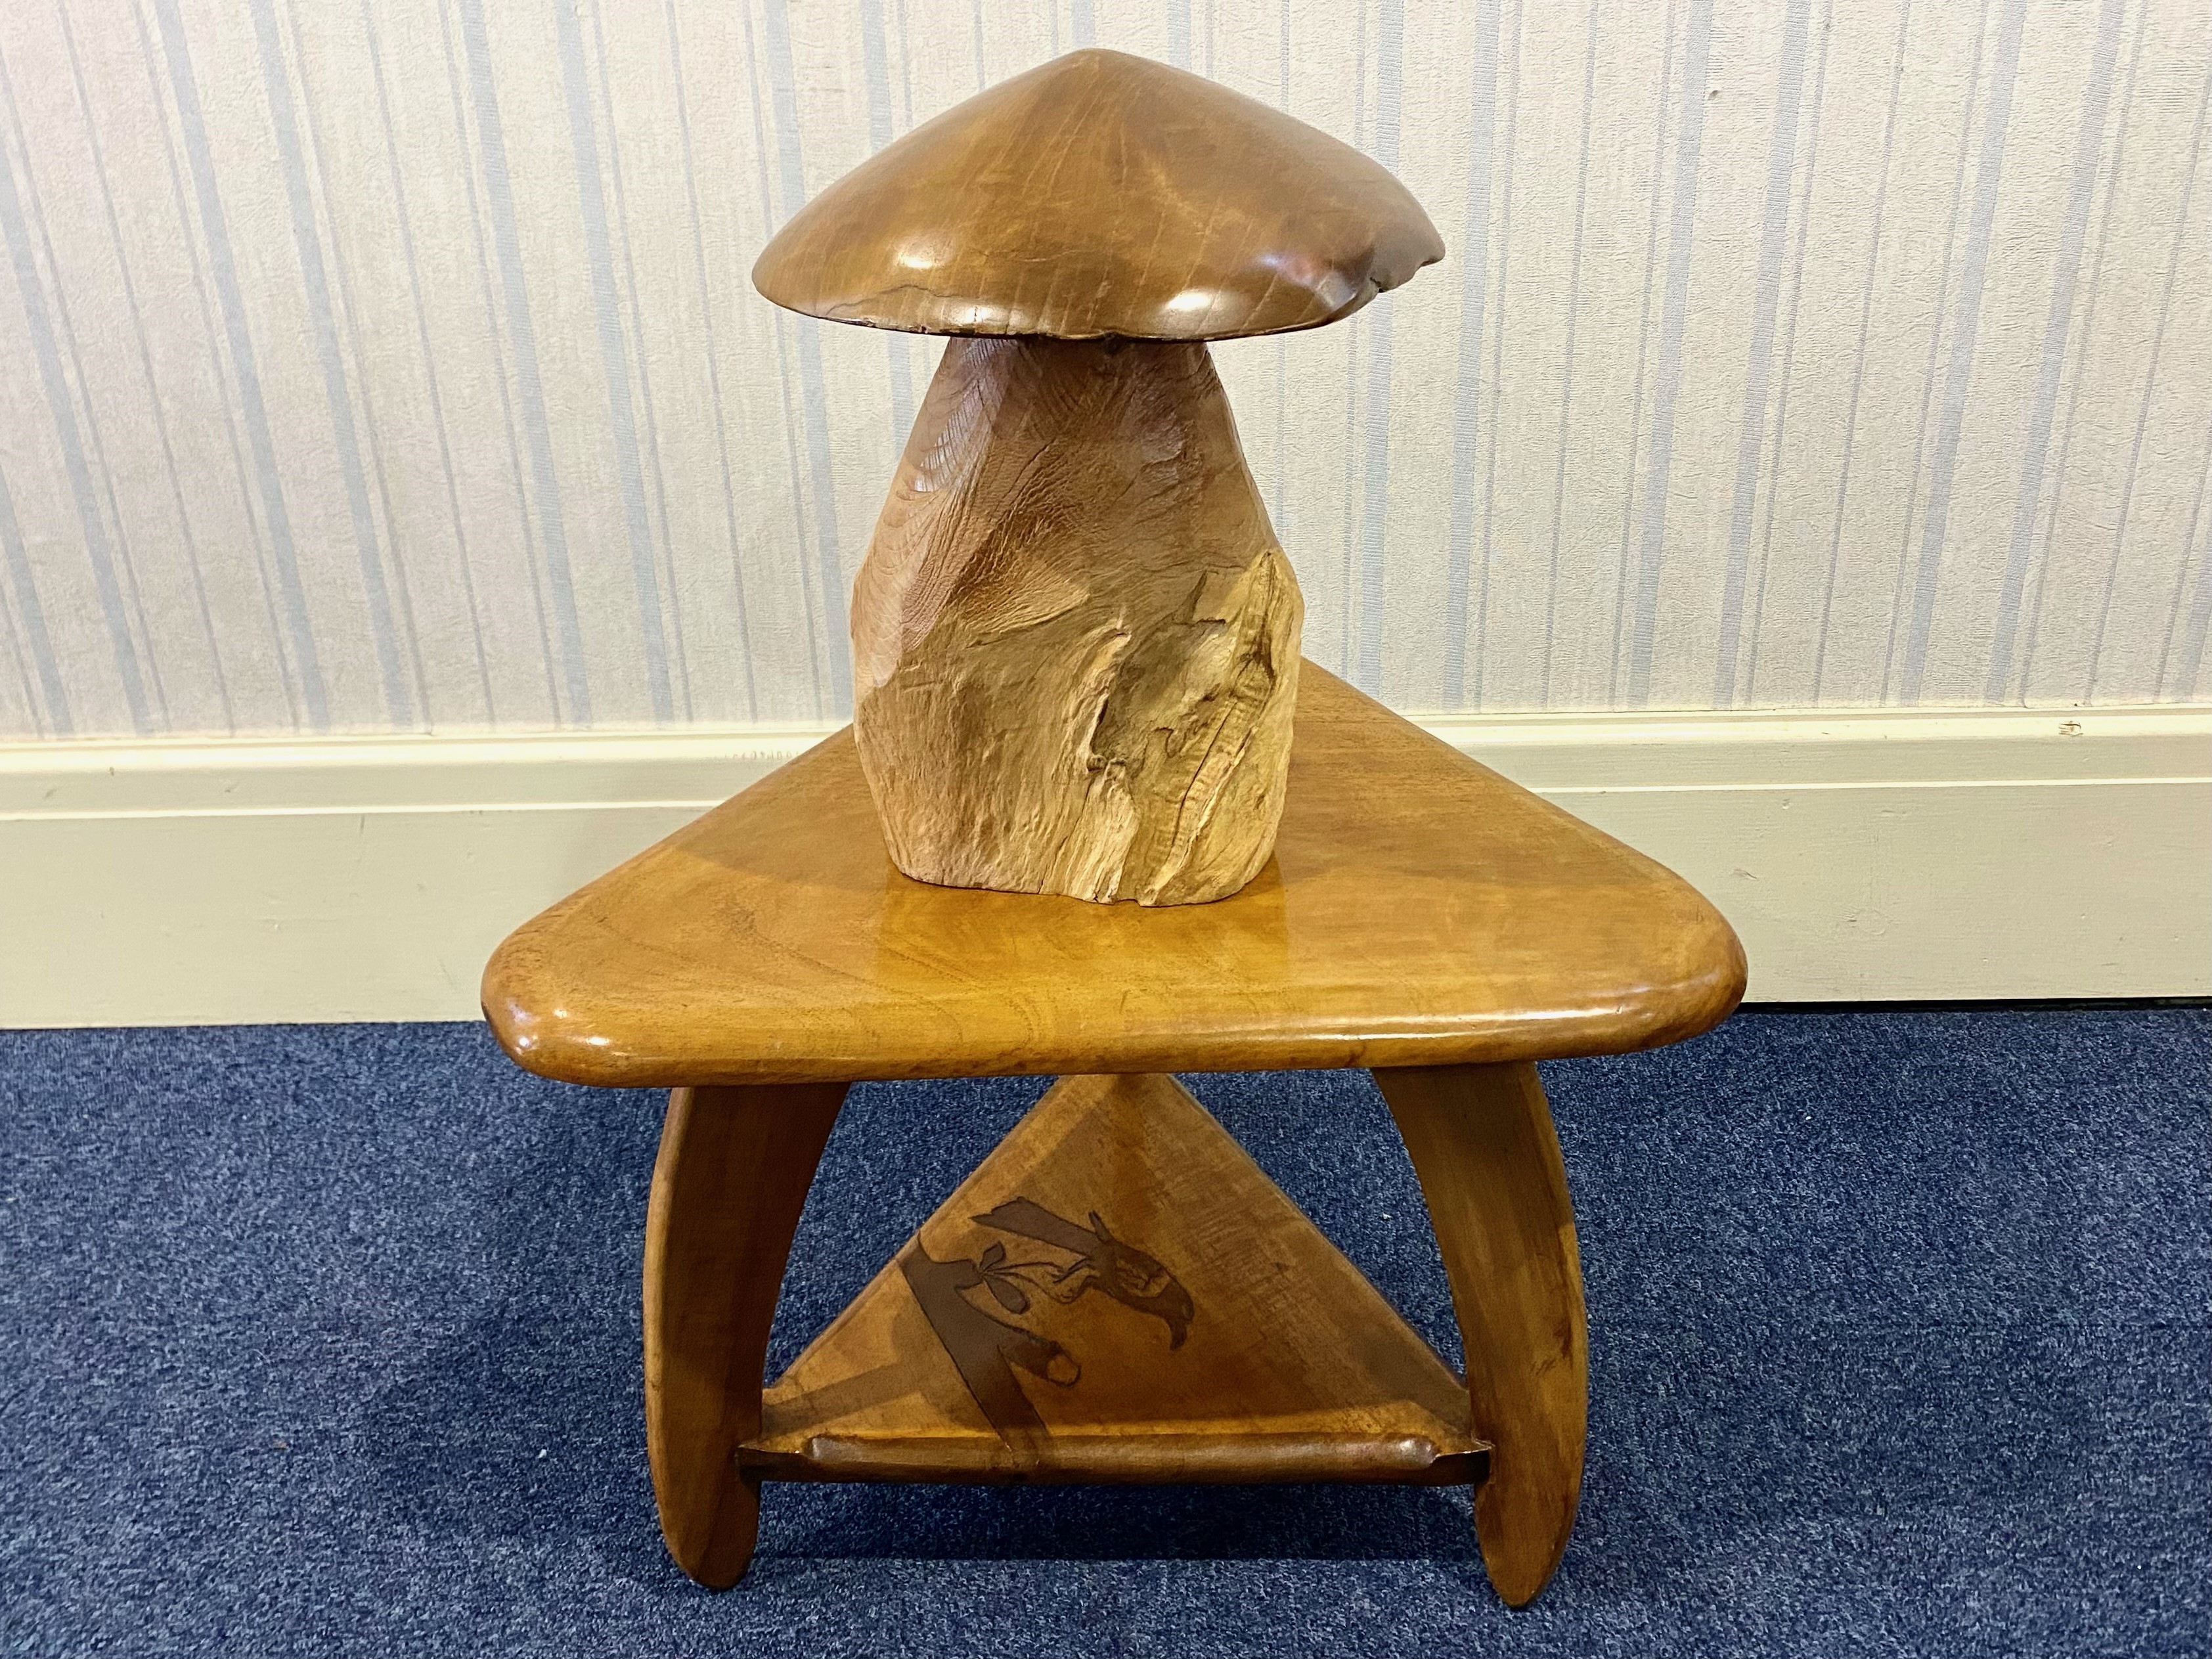 Triangular Wooden Side Table, raised on three legs, with a lower shelf decorated with an engraving